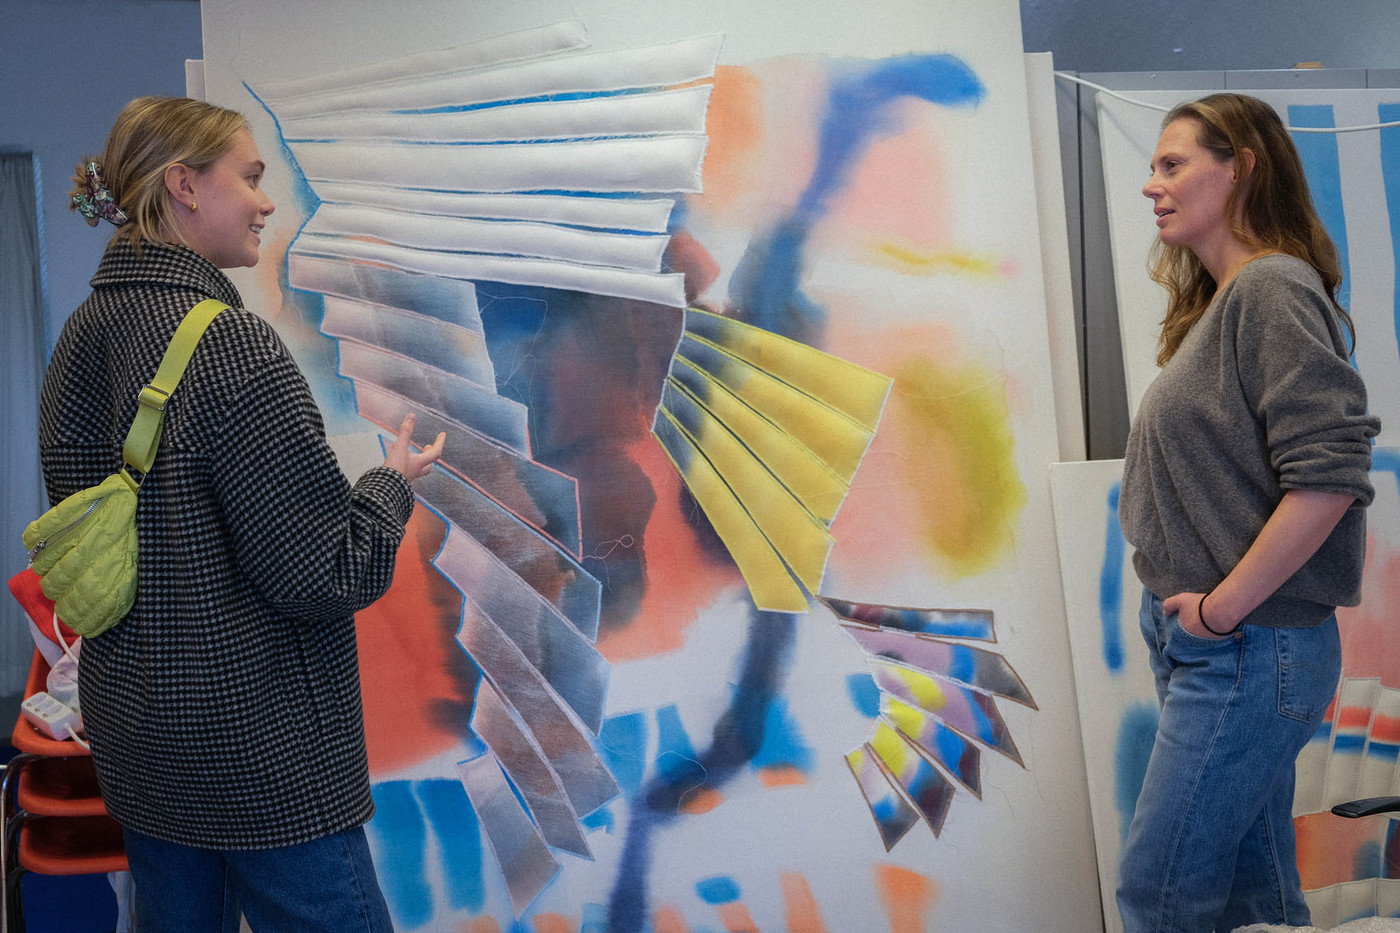 Marie Saxeide in conversation with artist Liv Tandrevold Eriksen, standing in front of a large and colourful painting.